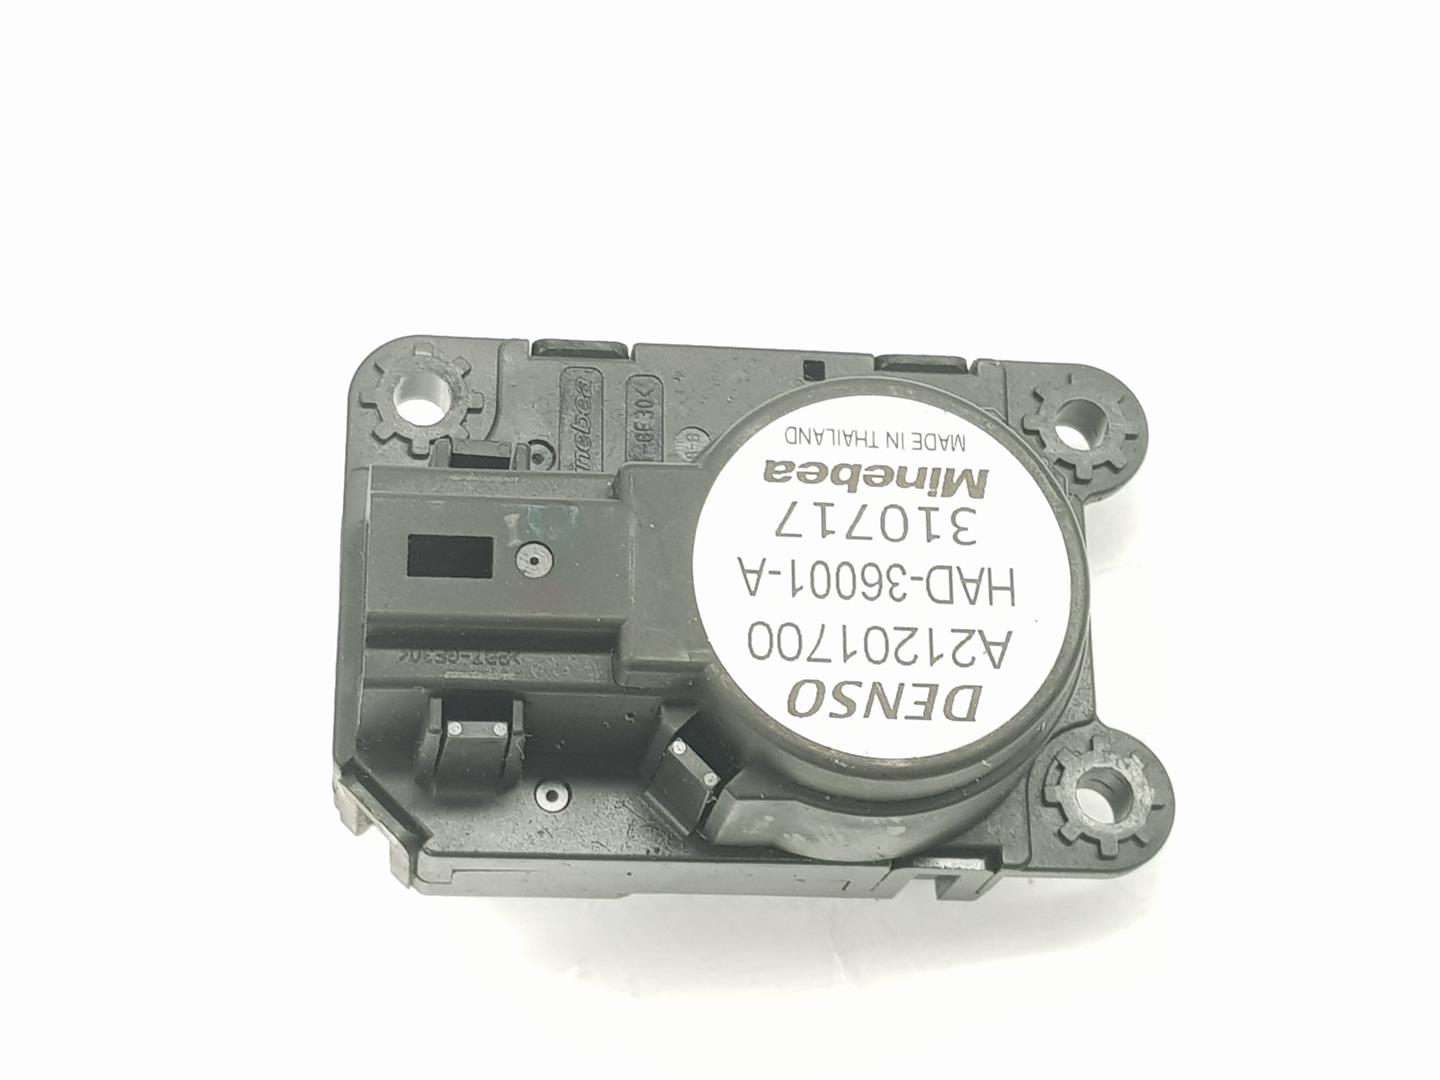 PEUGEOT 3008 SUV (2016-present) Air Conditioner Air Flow Valve Motor A21201700, A21201700 24208561